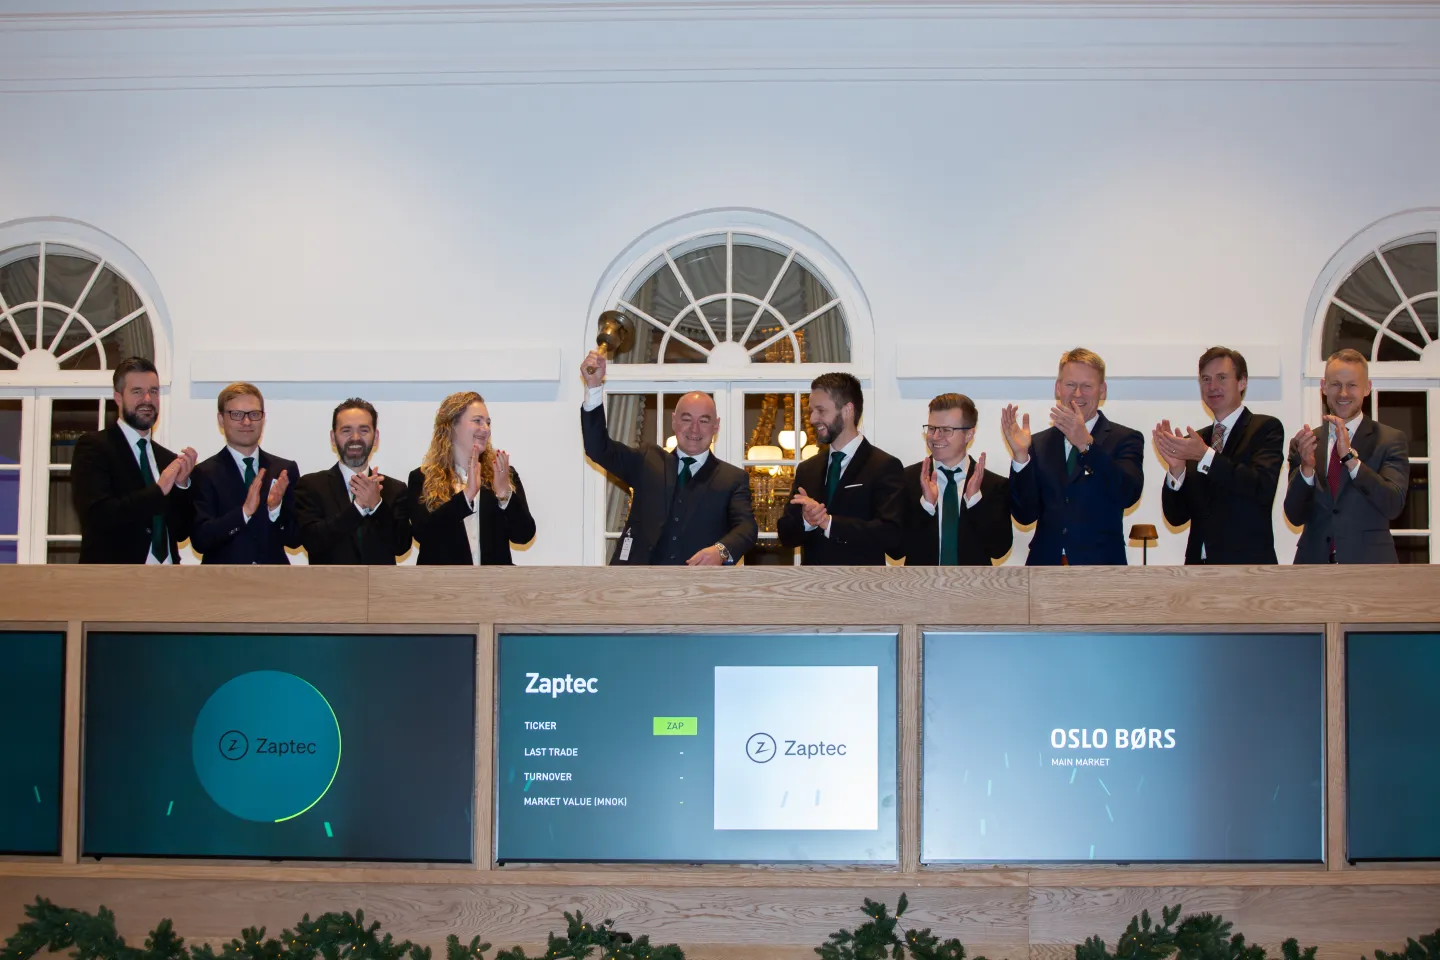 Caption: Peter Bardenfleth-Hansen, CEO of Zaptec, rang the bell this morning to celebrate the company’s listing on the Oslo Børs main market. They were welcomed by Øivind Amundsen, CEO and President of Oslo Børs (Photo: Chris Fey/ NTB).